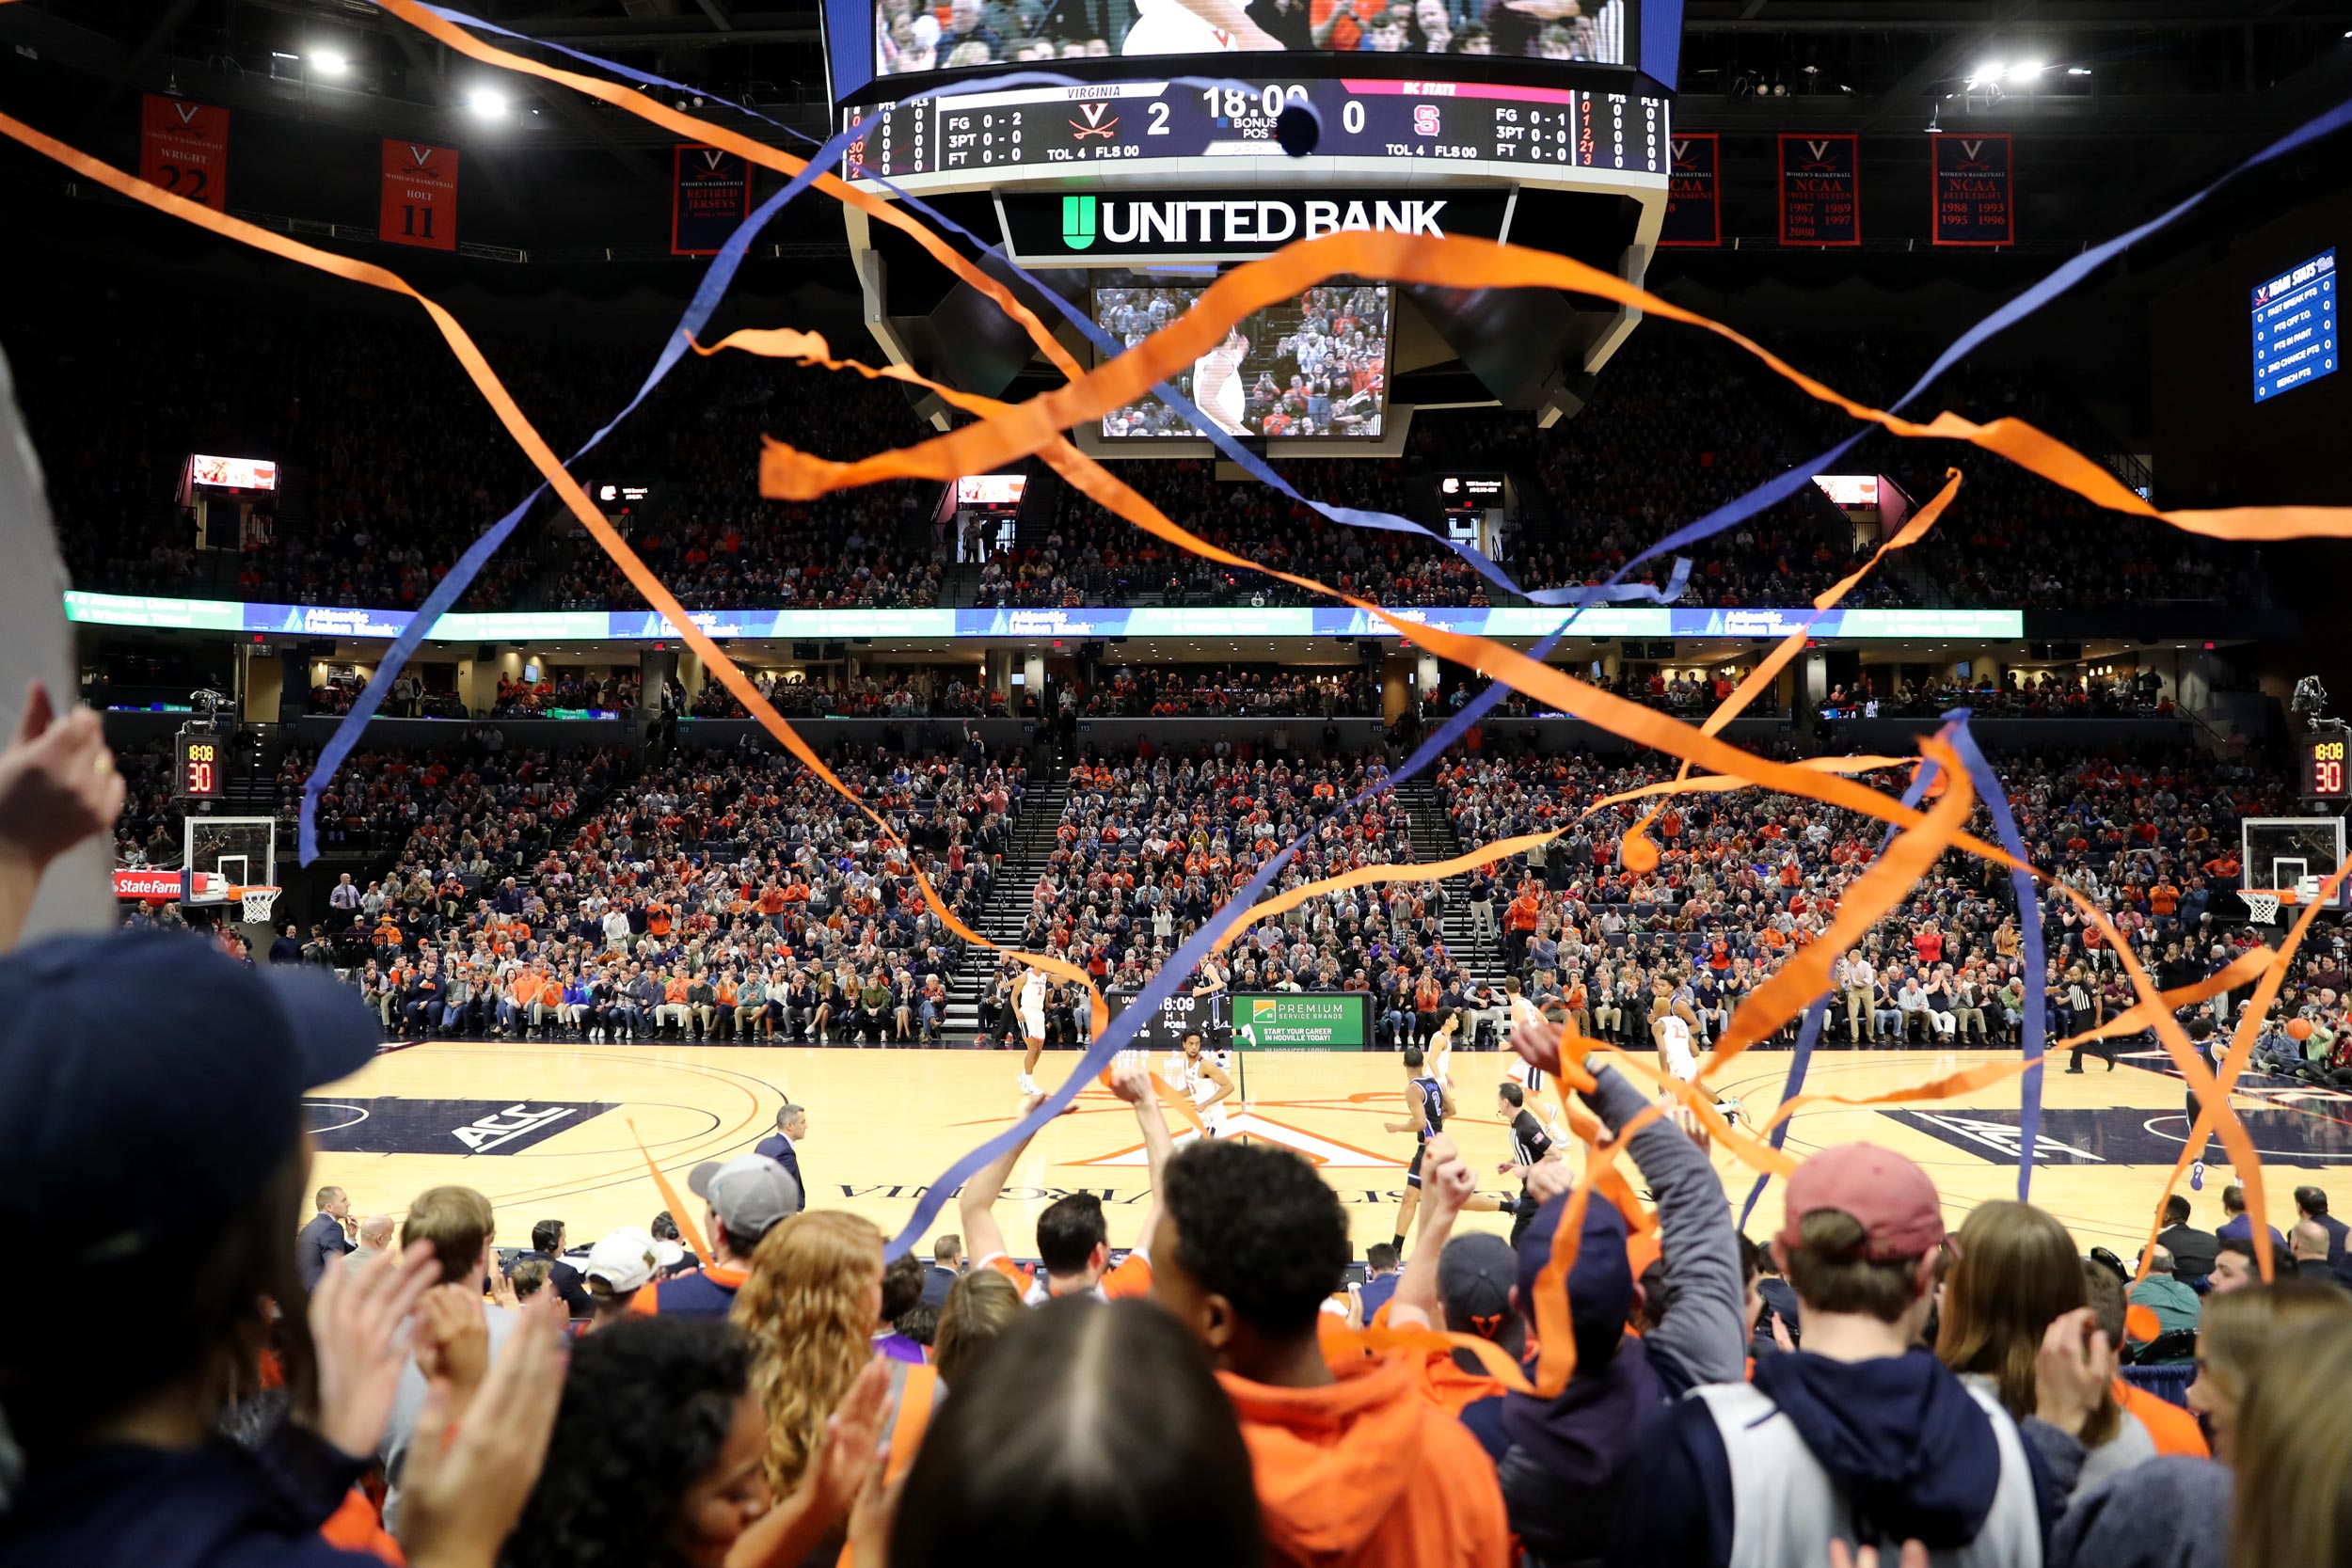 Blue and orange streamers being thrown during a basketball game